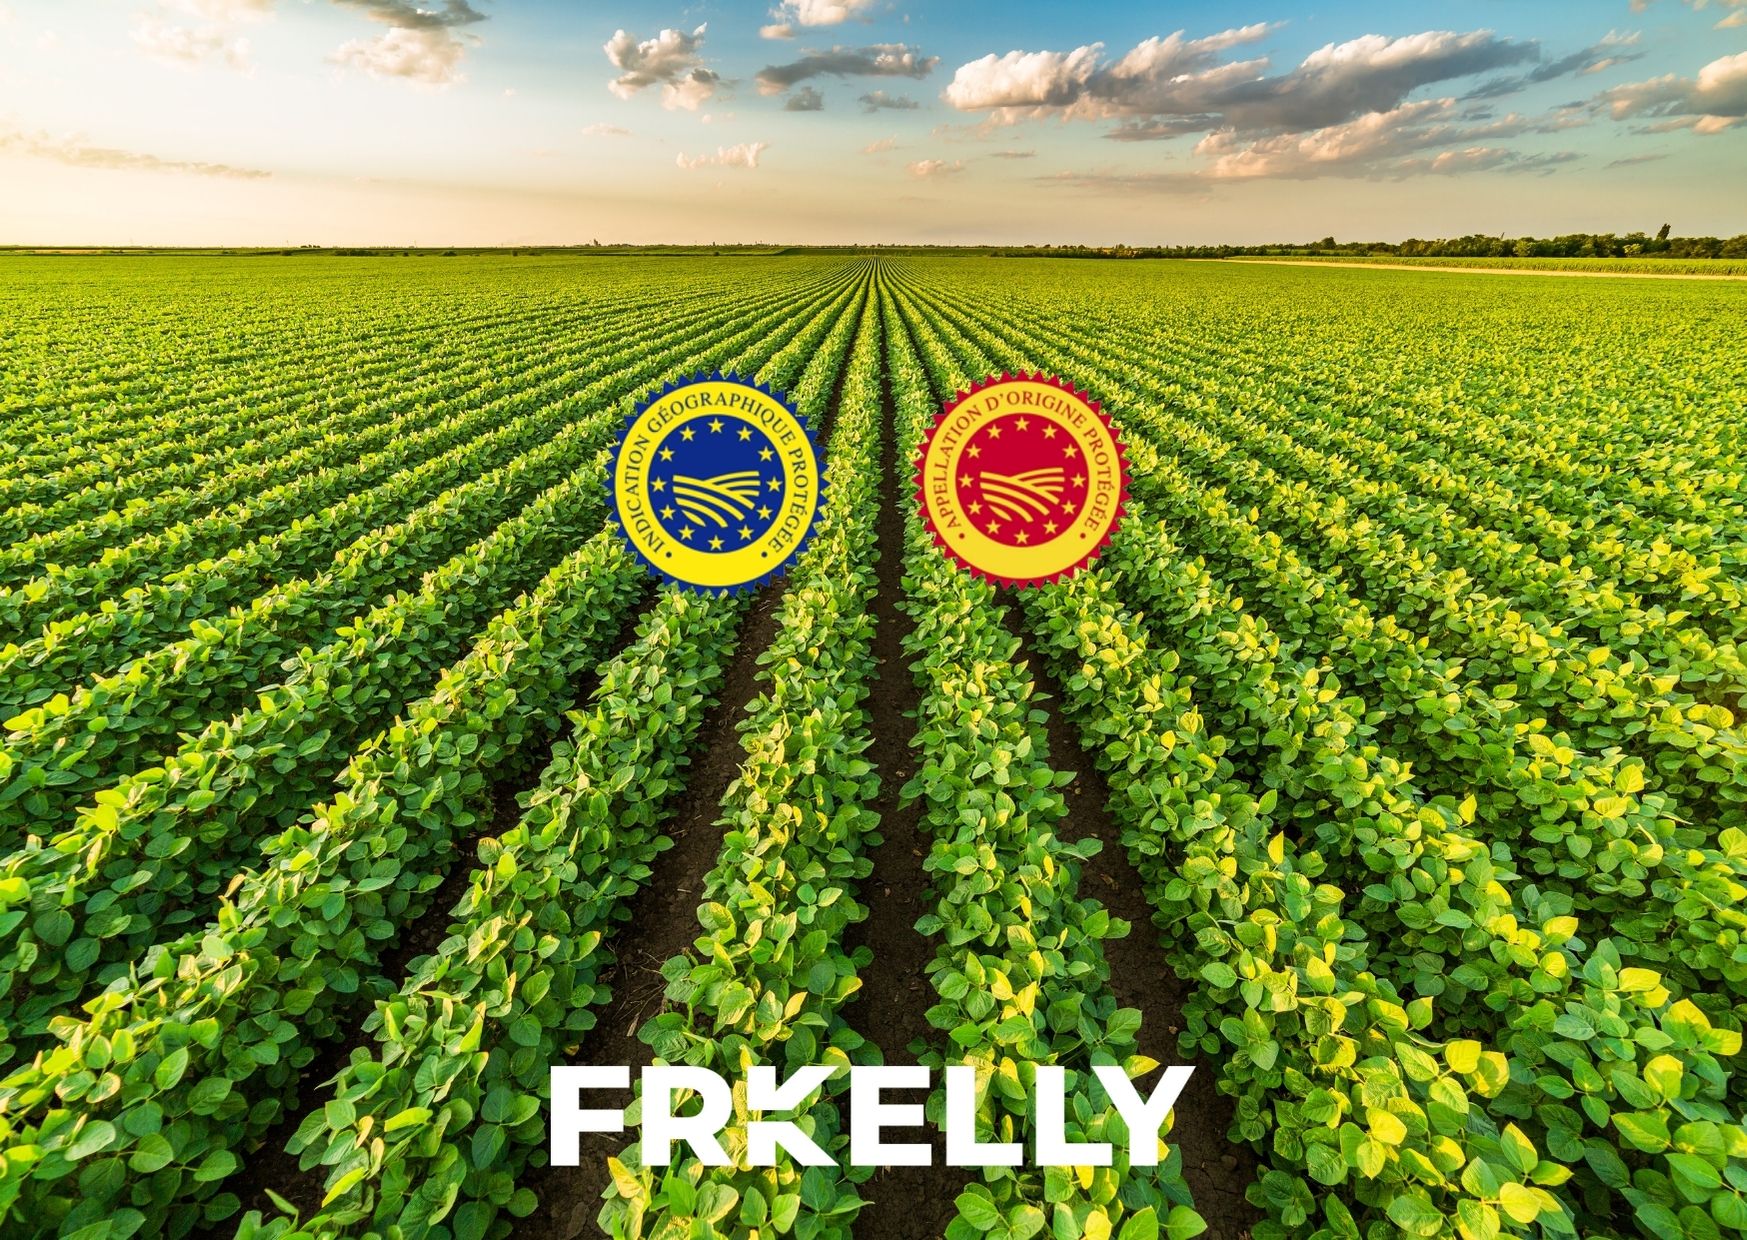 GIs logos in agricultural field with FRKelly logo